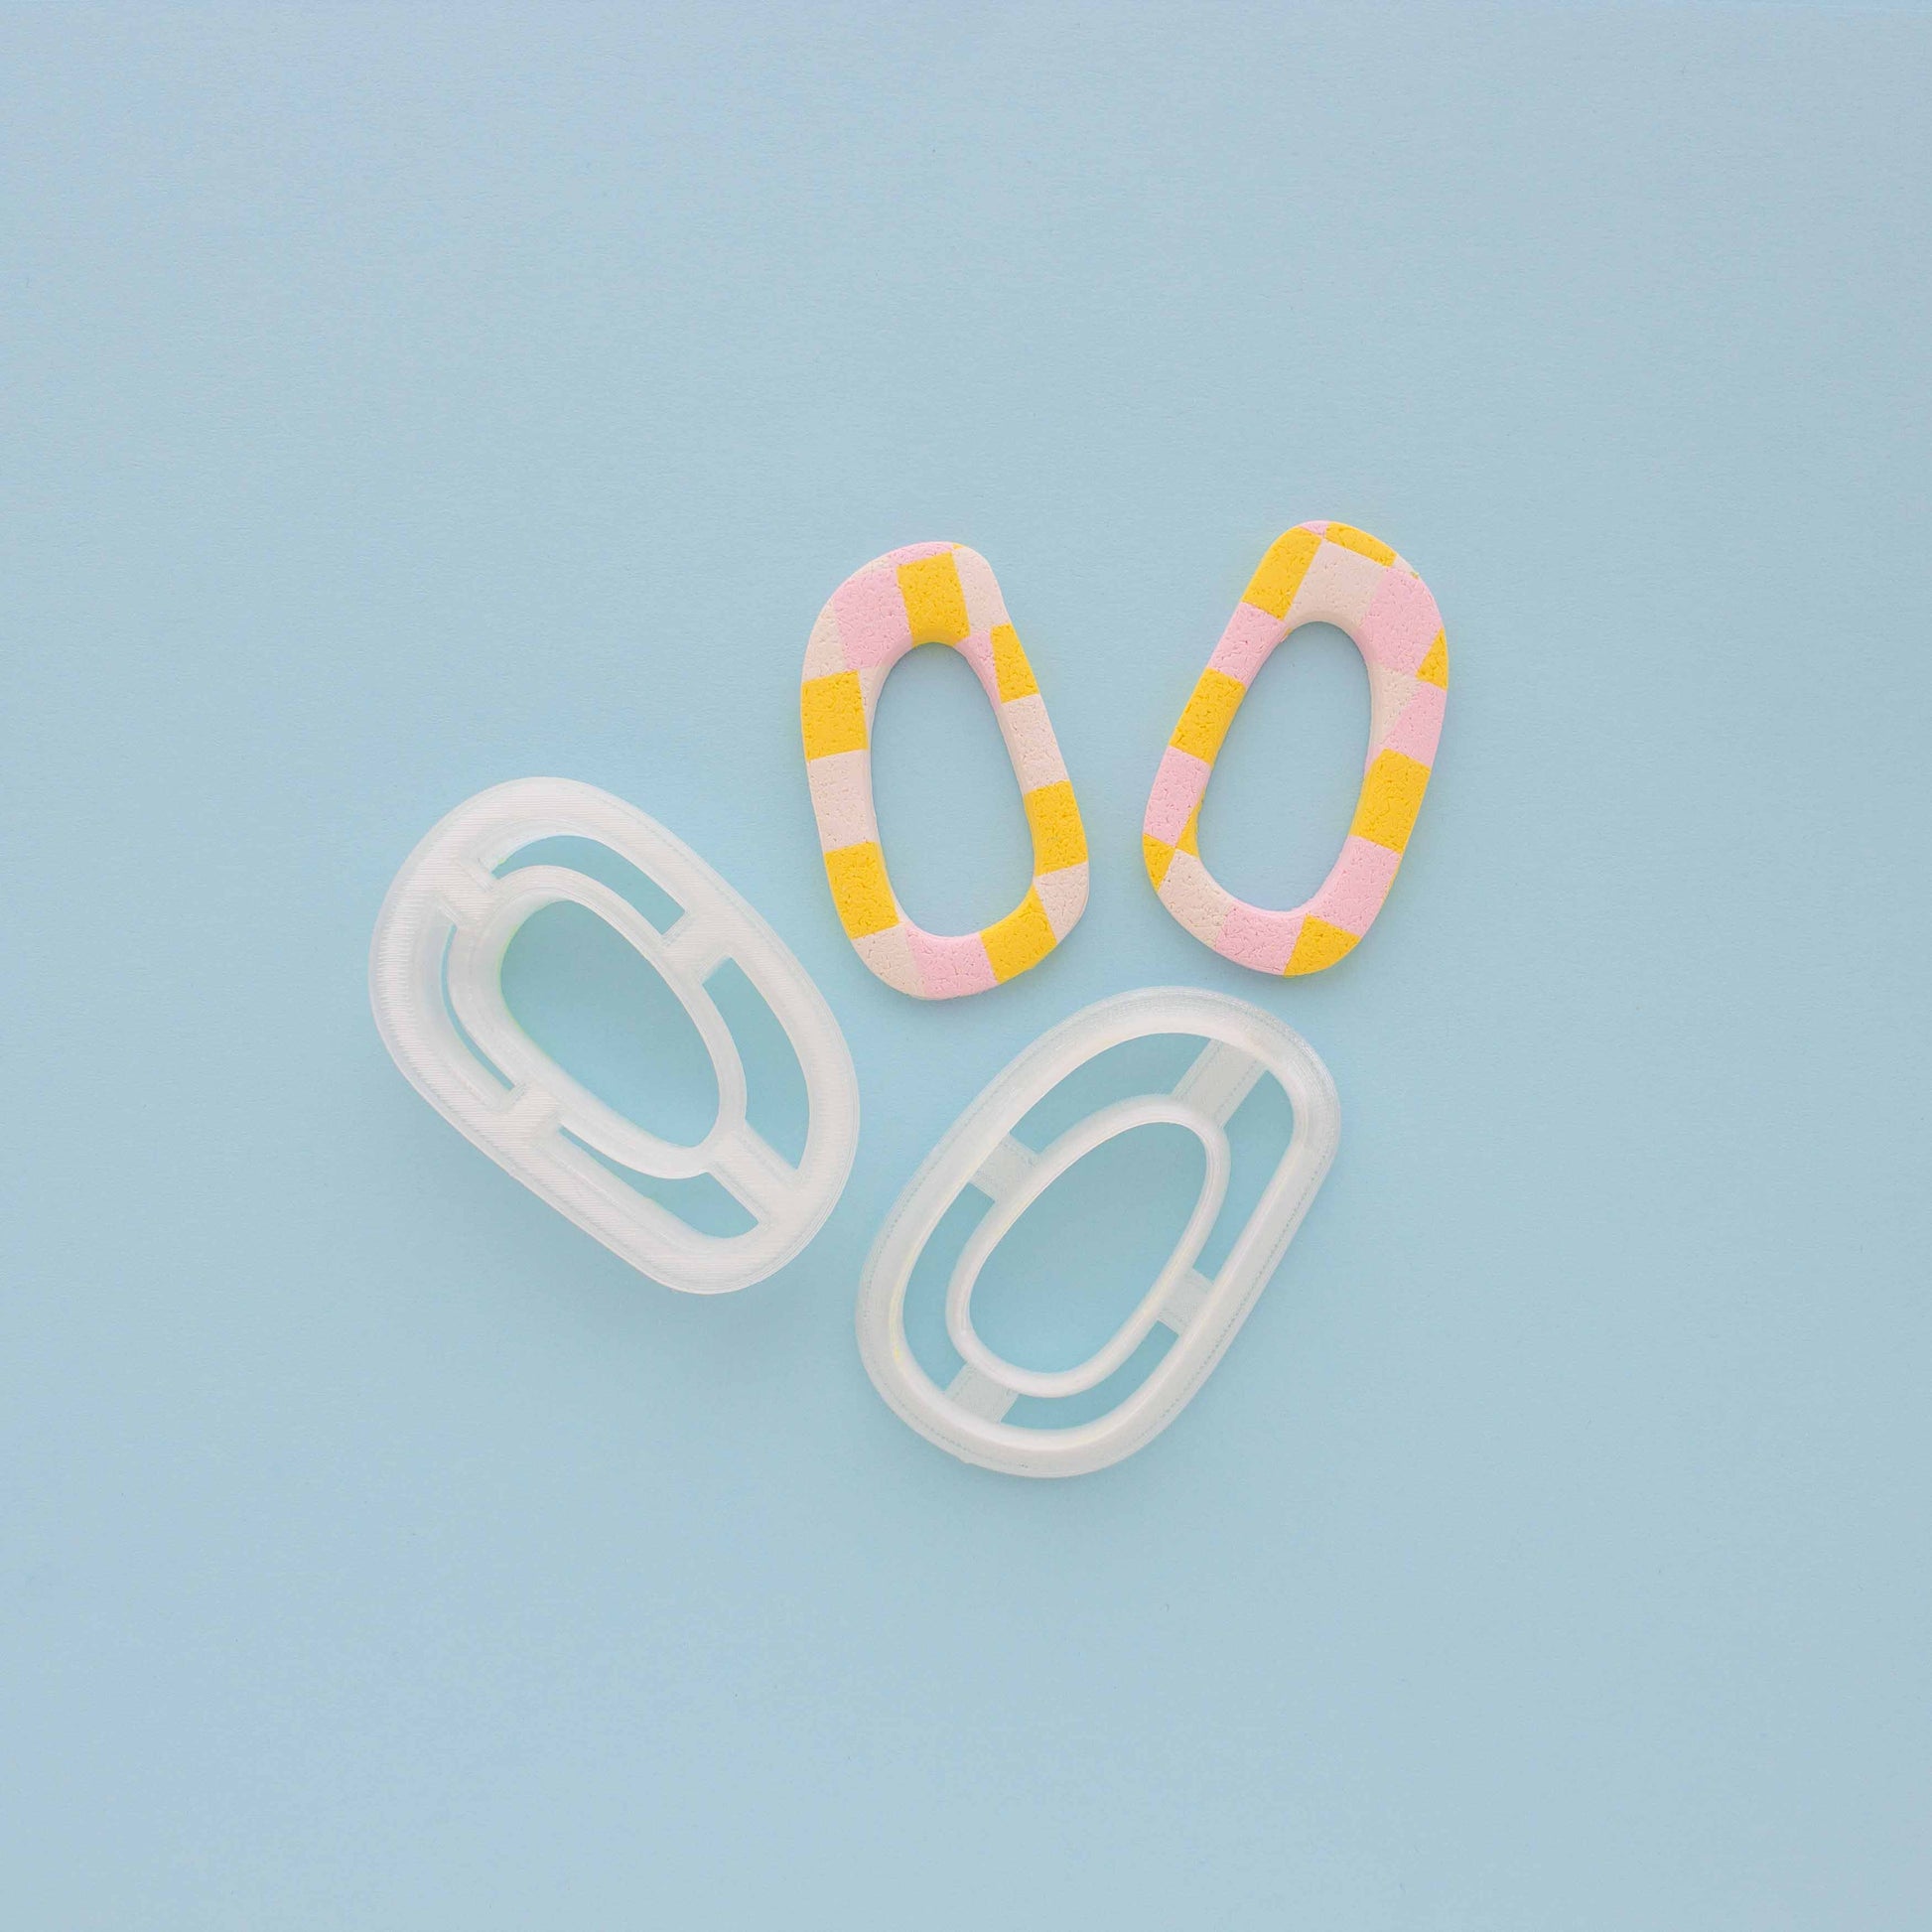 Two abstract hoop earrings and polymer clay cutters in a light blue background